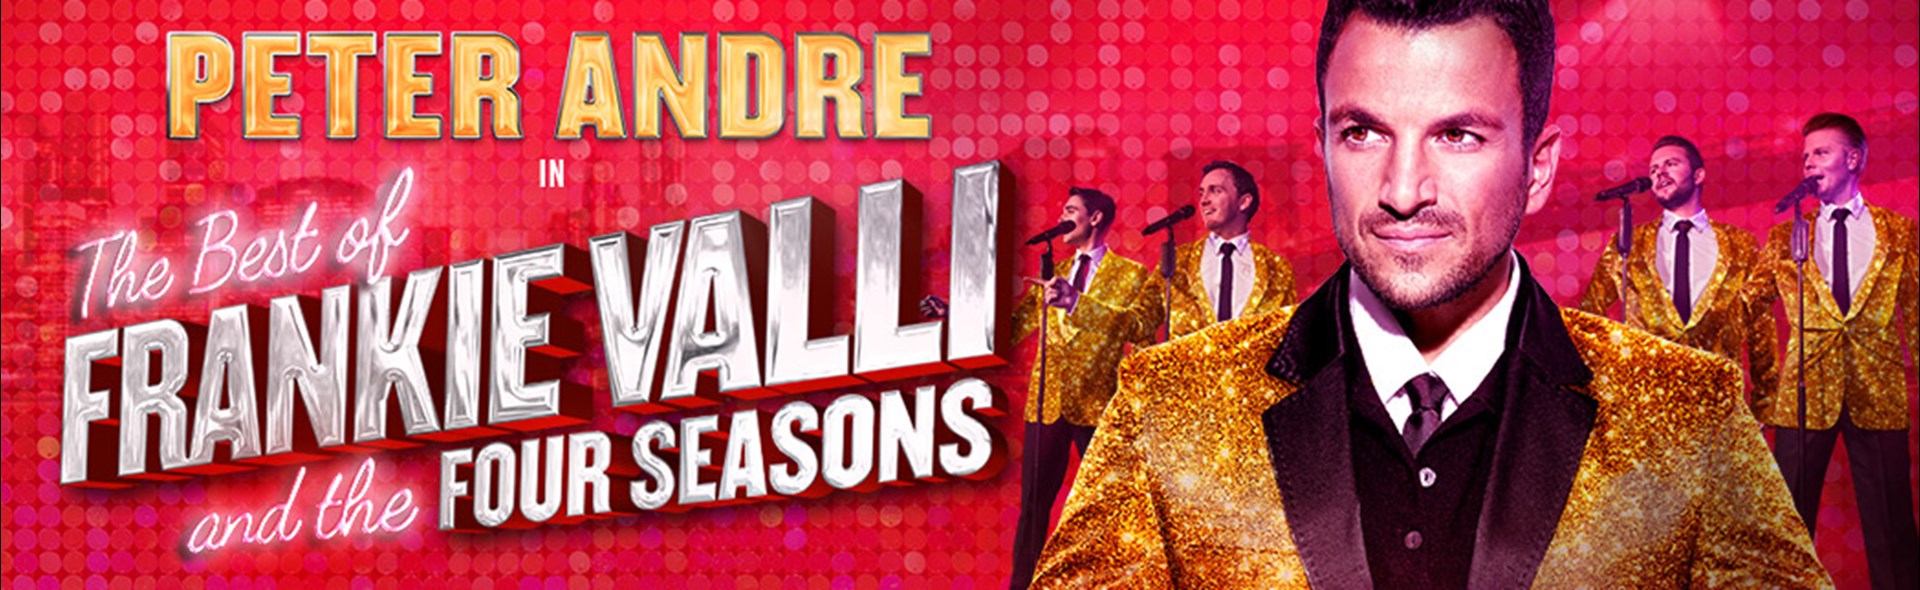 The Best of Frankie Valli and the Four Seasons starring Peter Andre